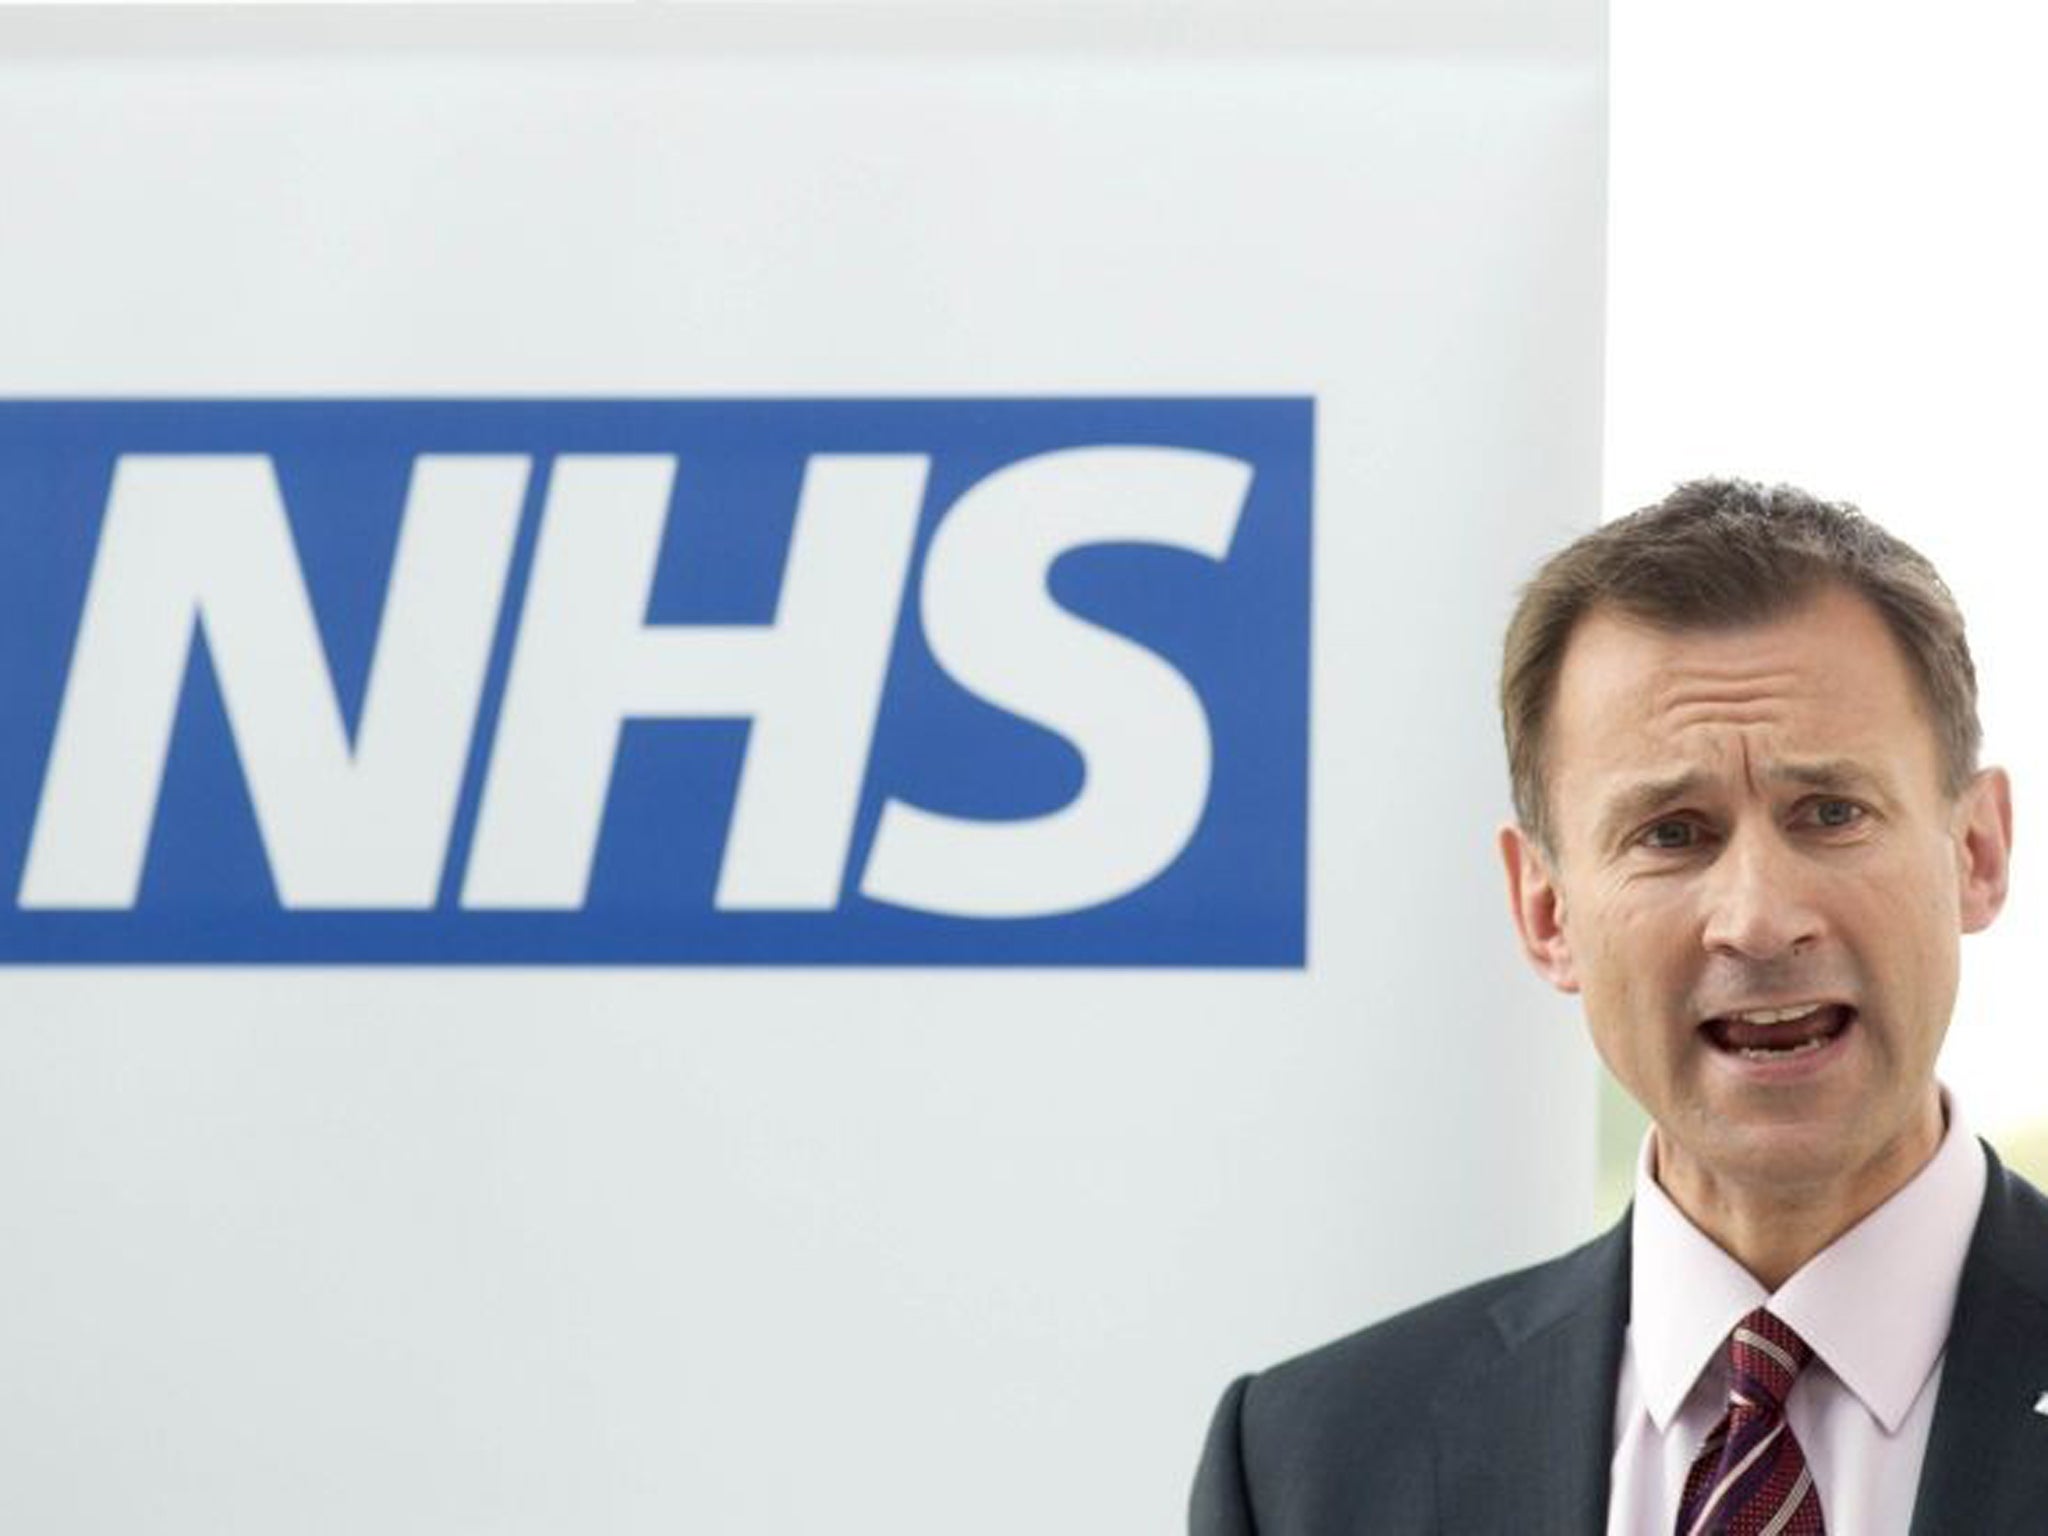 Health Secretary Jeremy Hunt said the quality of NHS care at weekends was 'completely unacceptable'